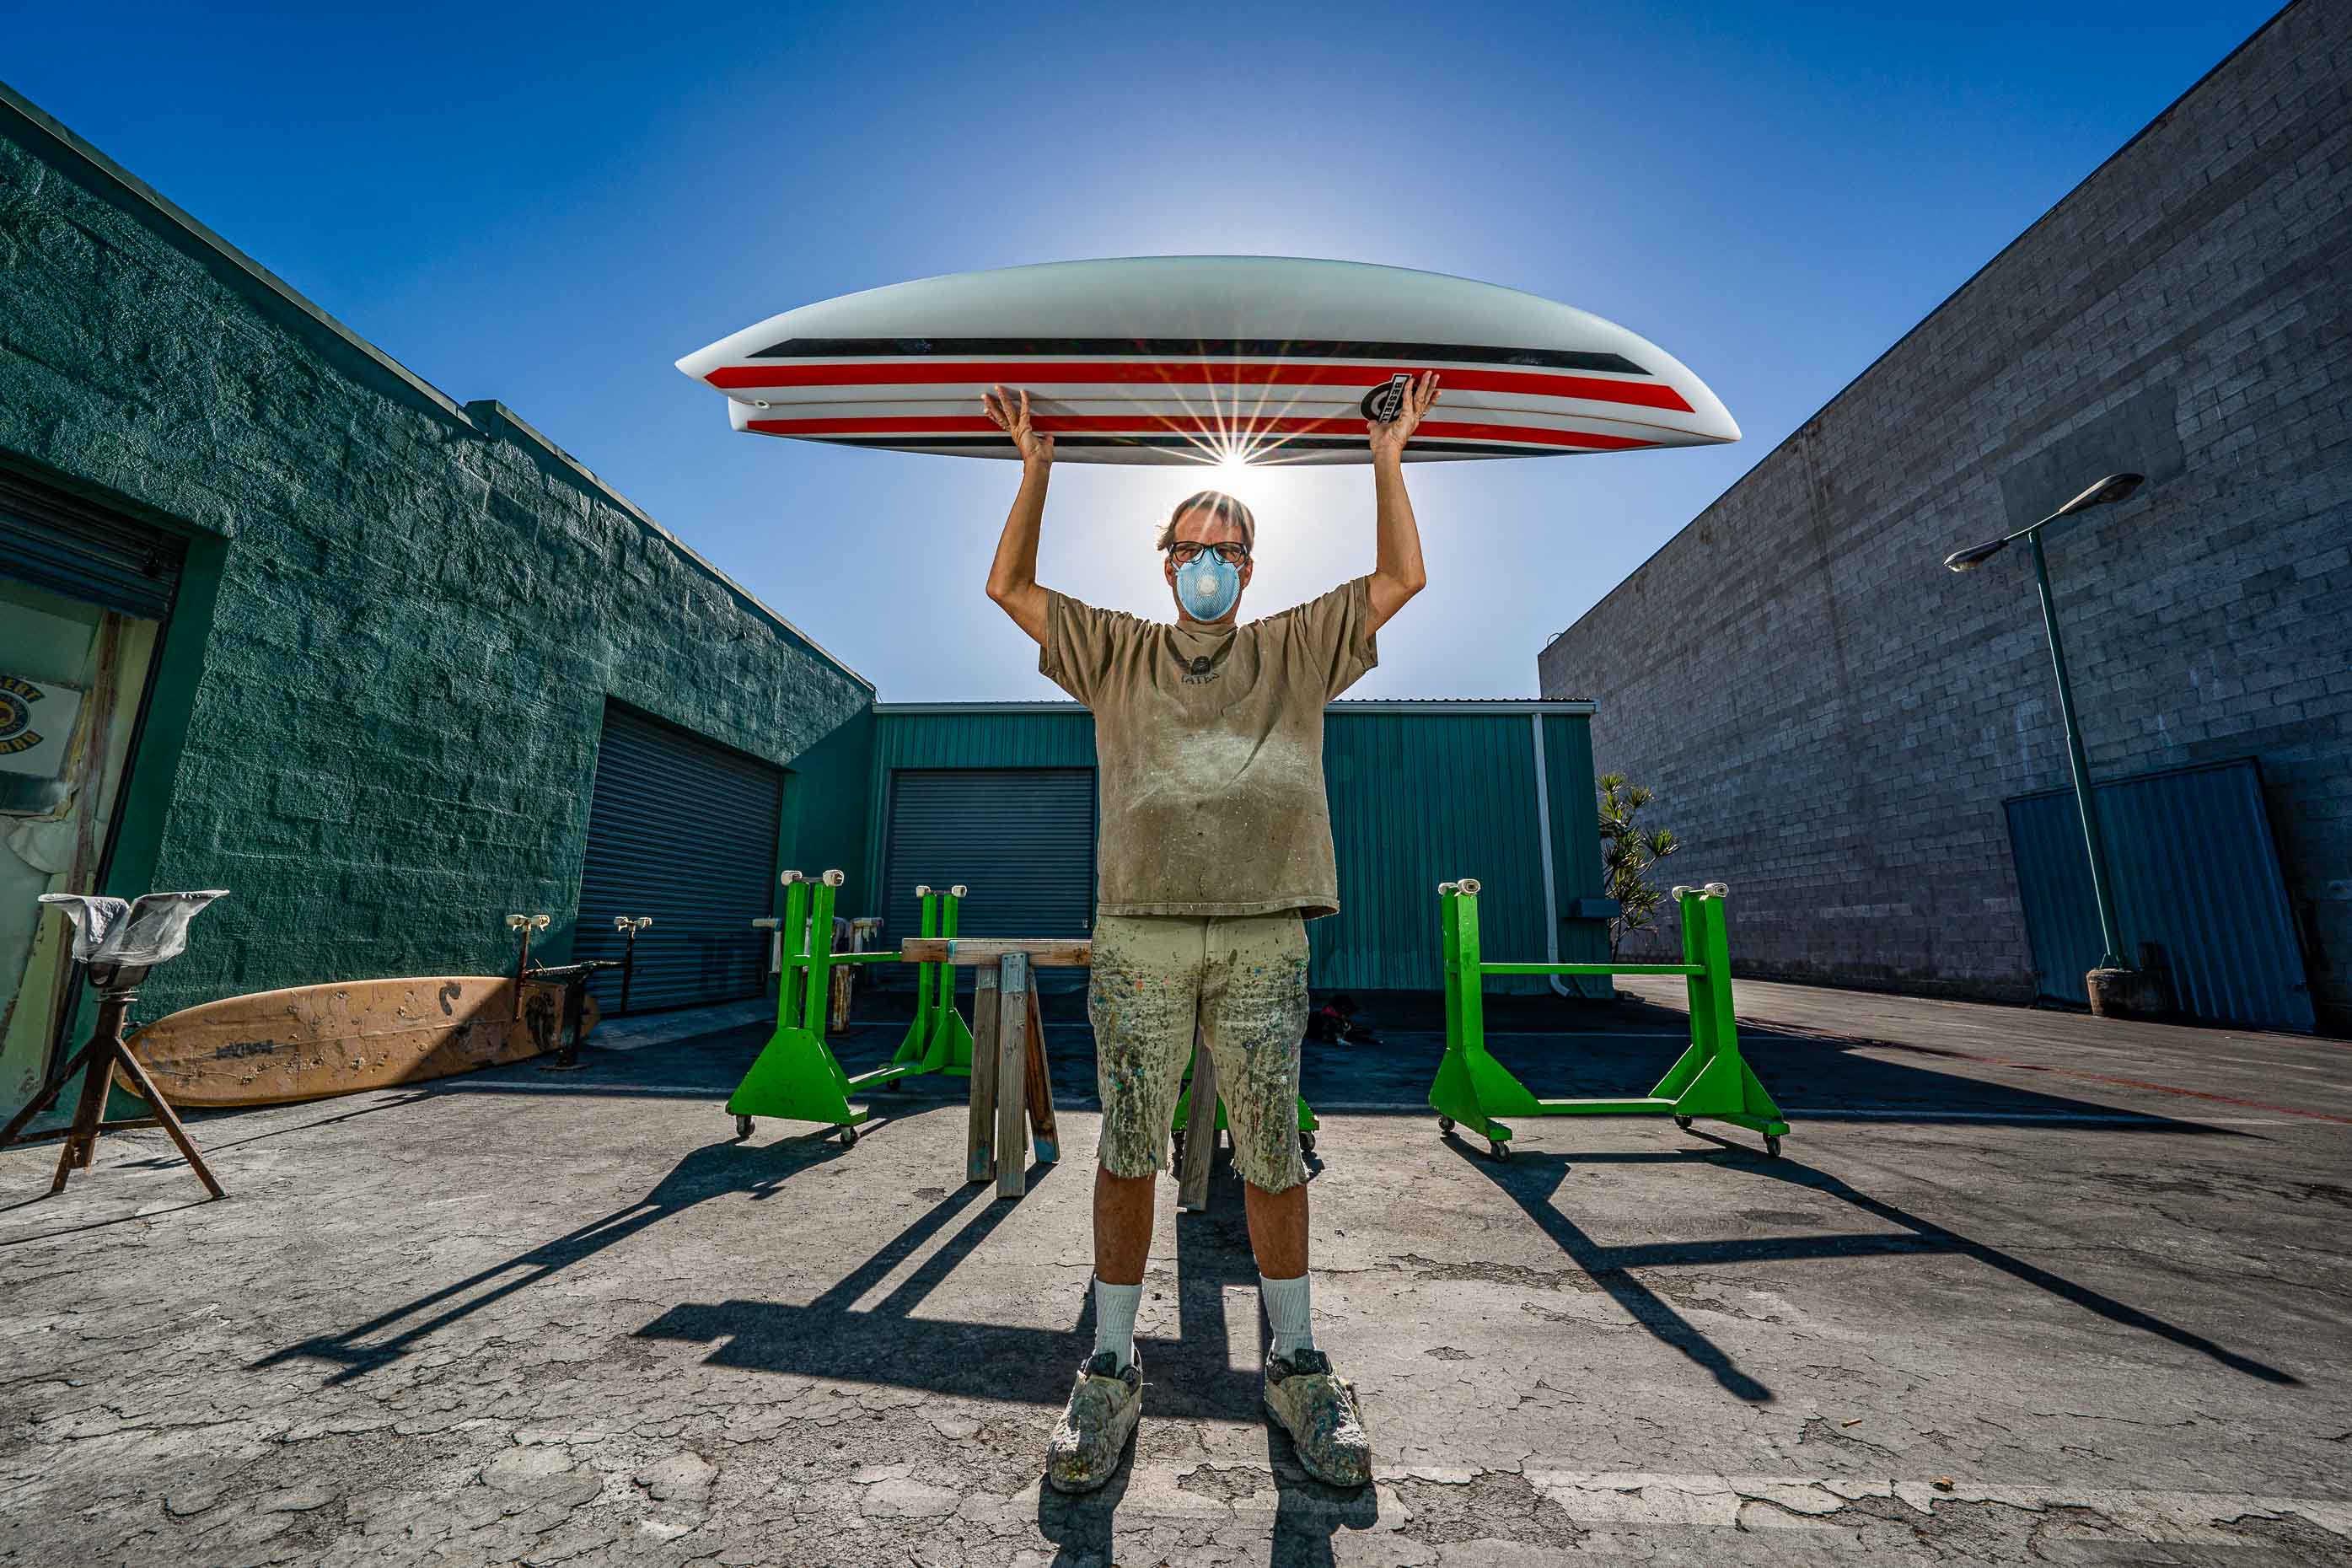 aaron-ingrao-keepers-of-the-craft-tim-bessell-surfboards-san-diego-6389-Edit